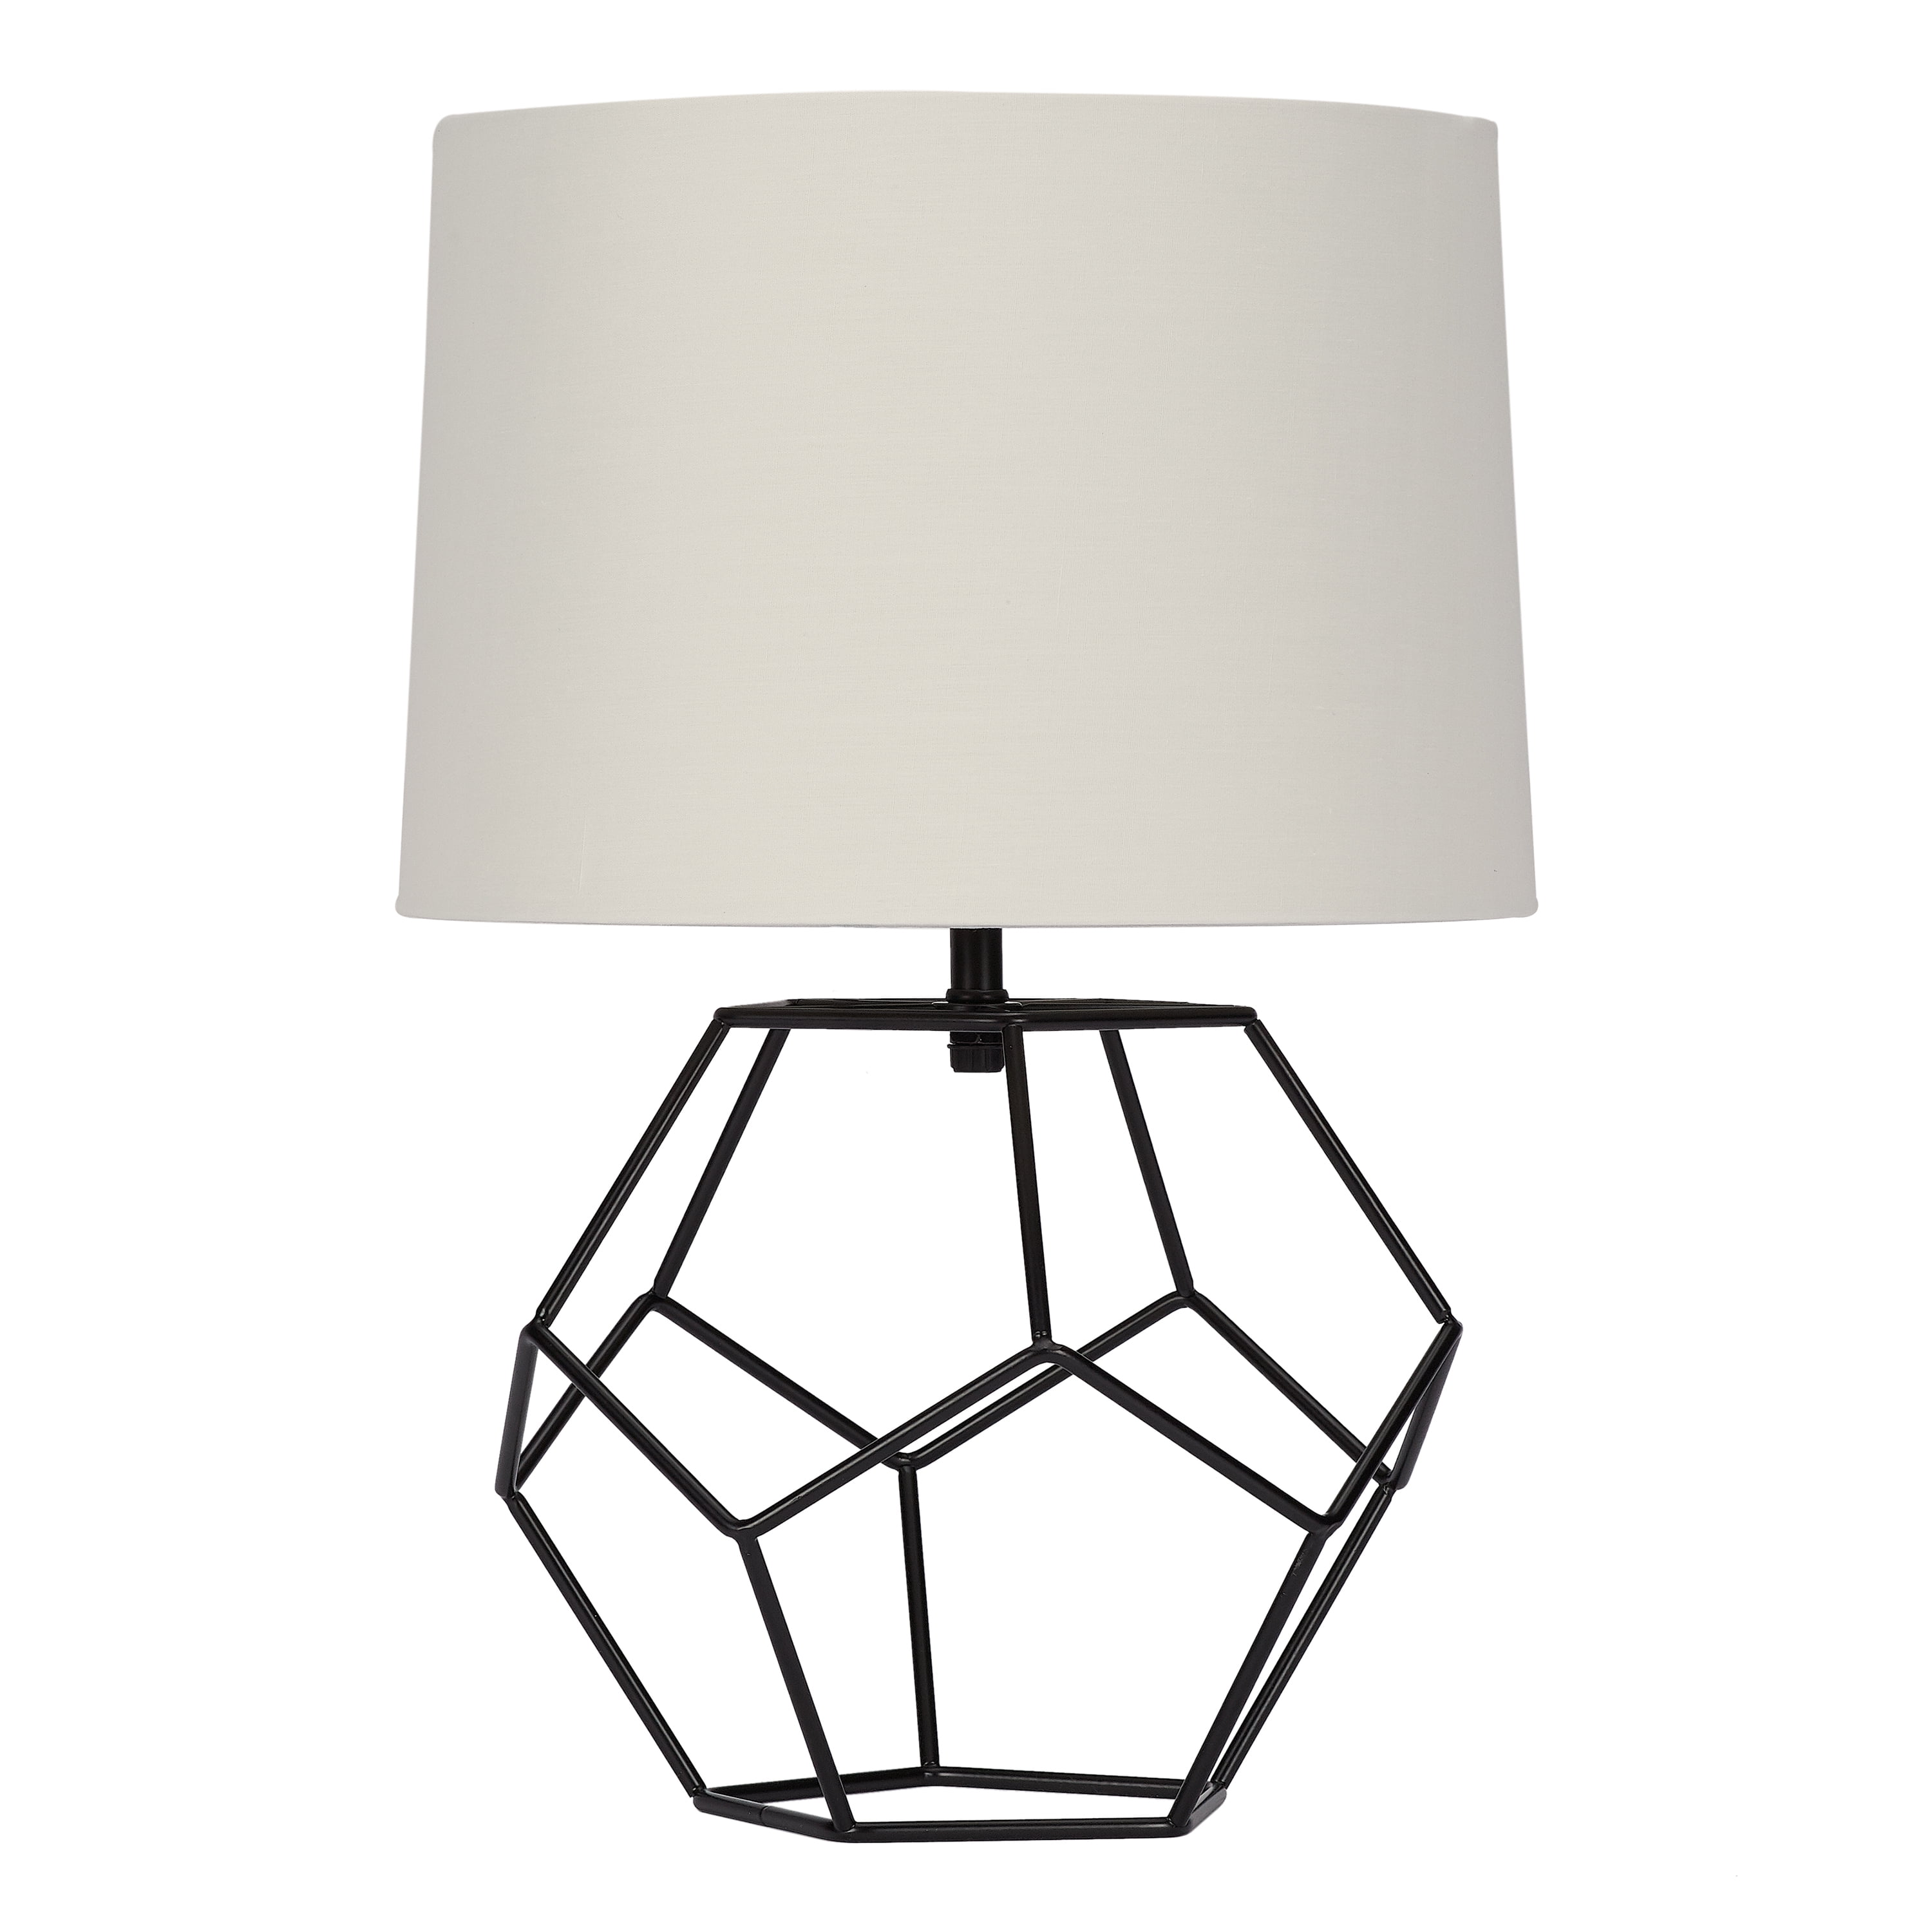 Cage Metal Base Table Lamp With Shade, Table Lamp Black Metal